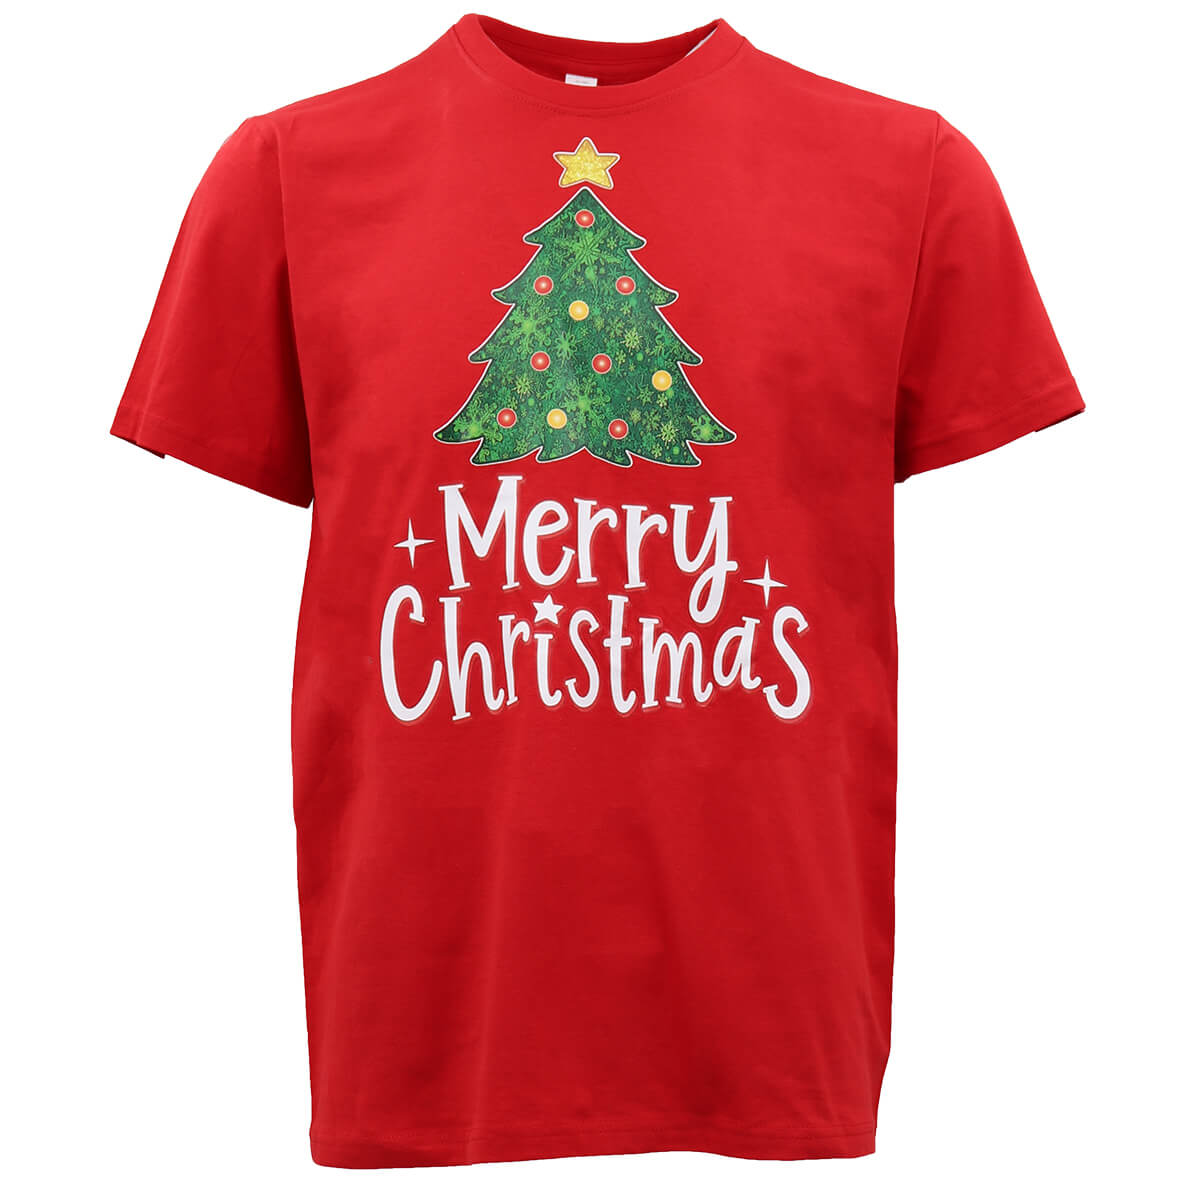 New Funny Adult Xmas Christmas T Shirt Tee Mens Womens 100% Cotton Jolly Ugly, Tree (Red) B, XS